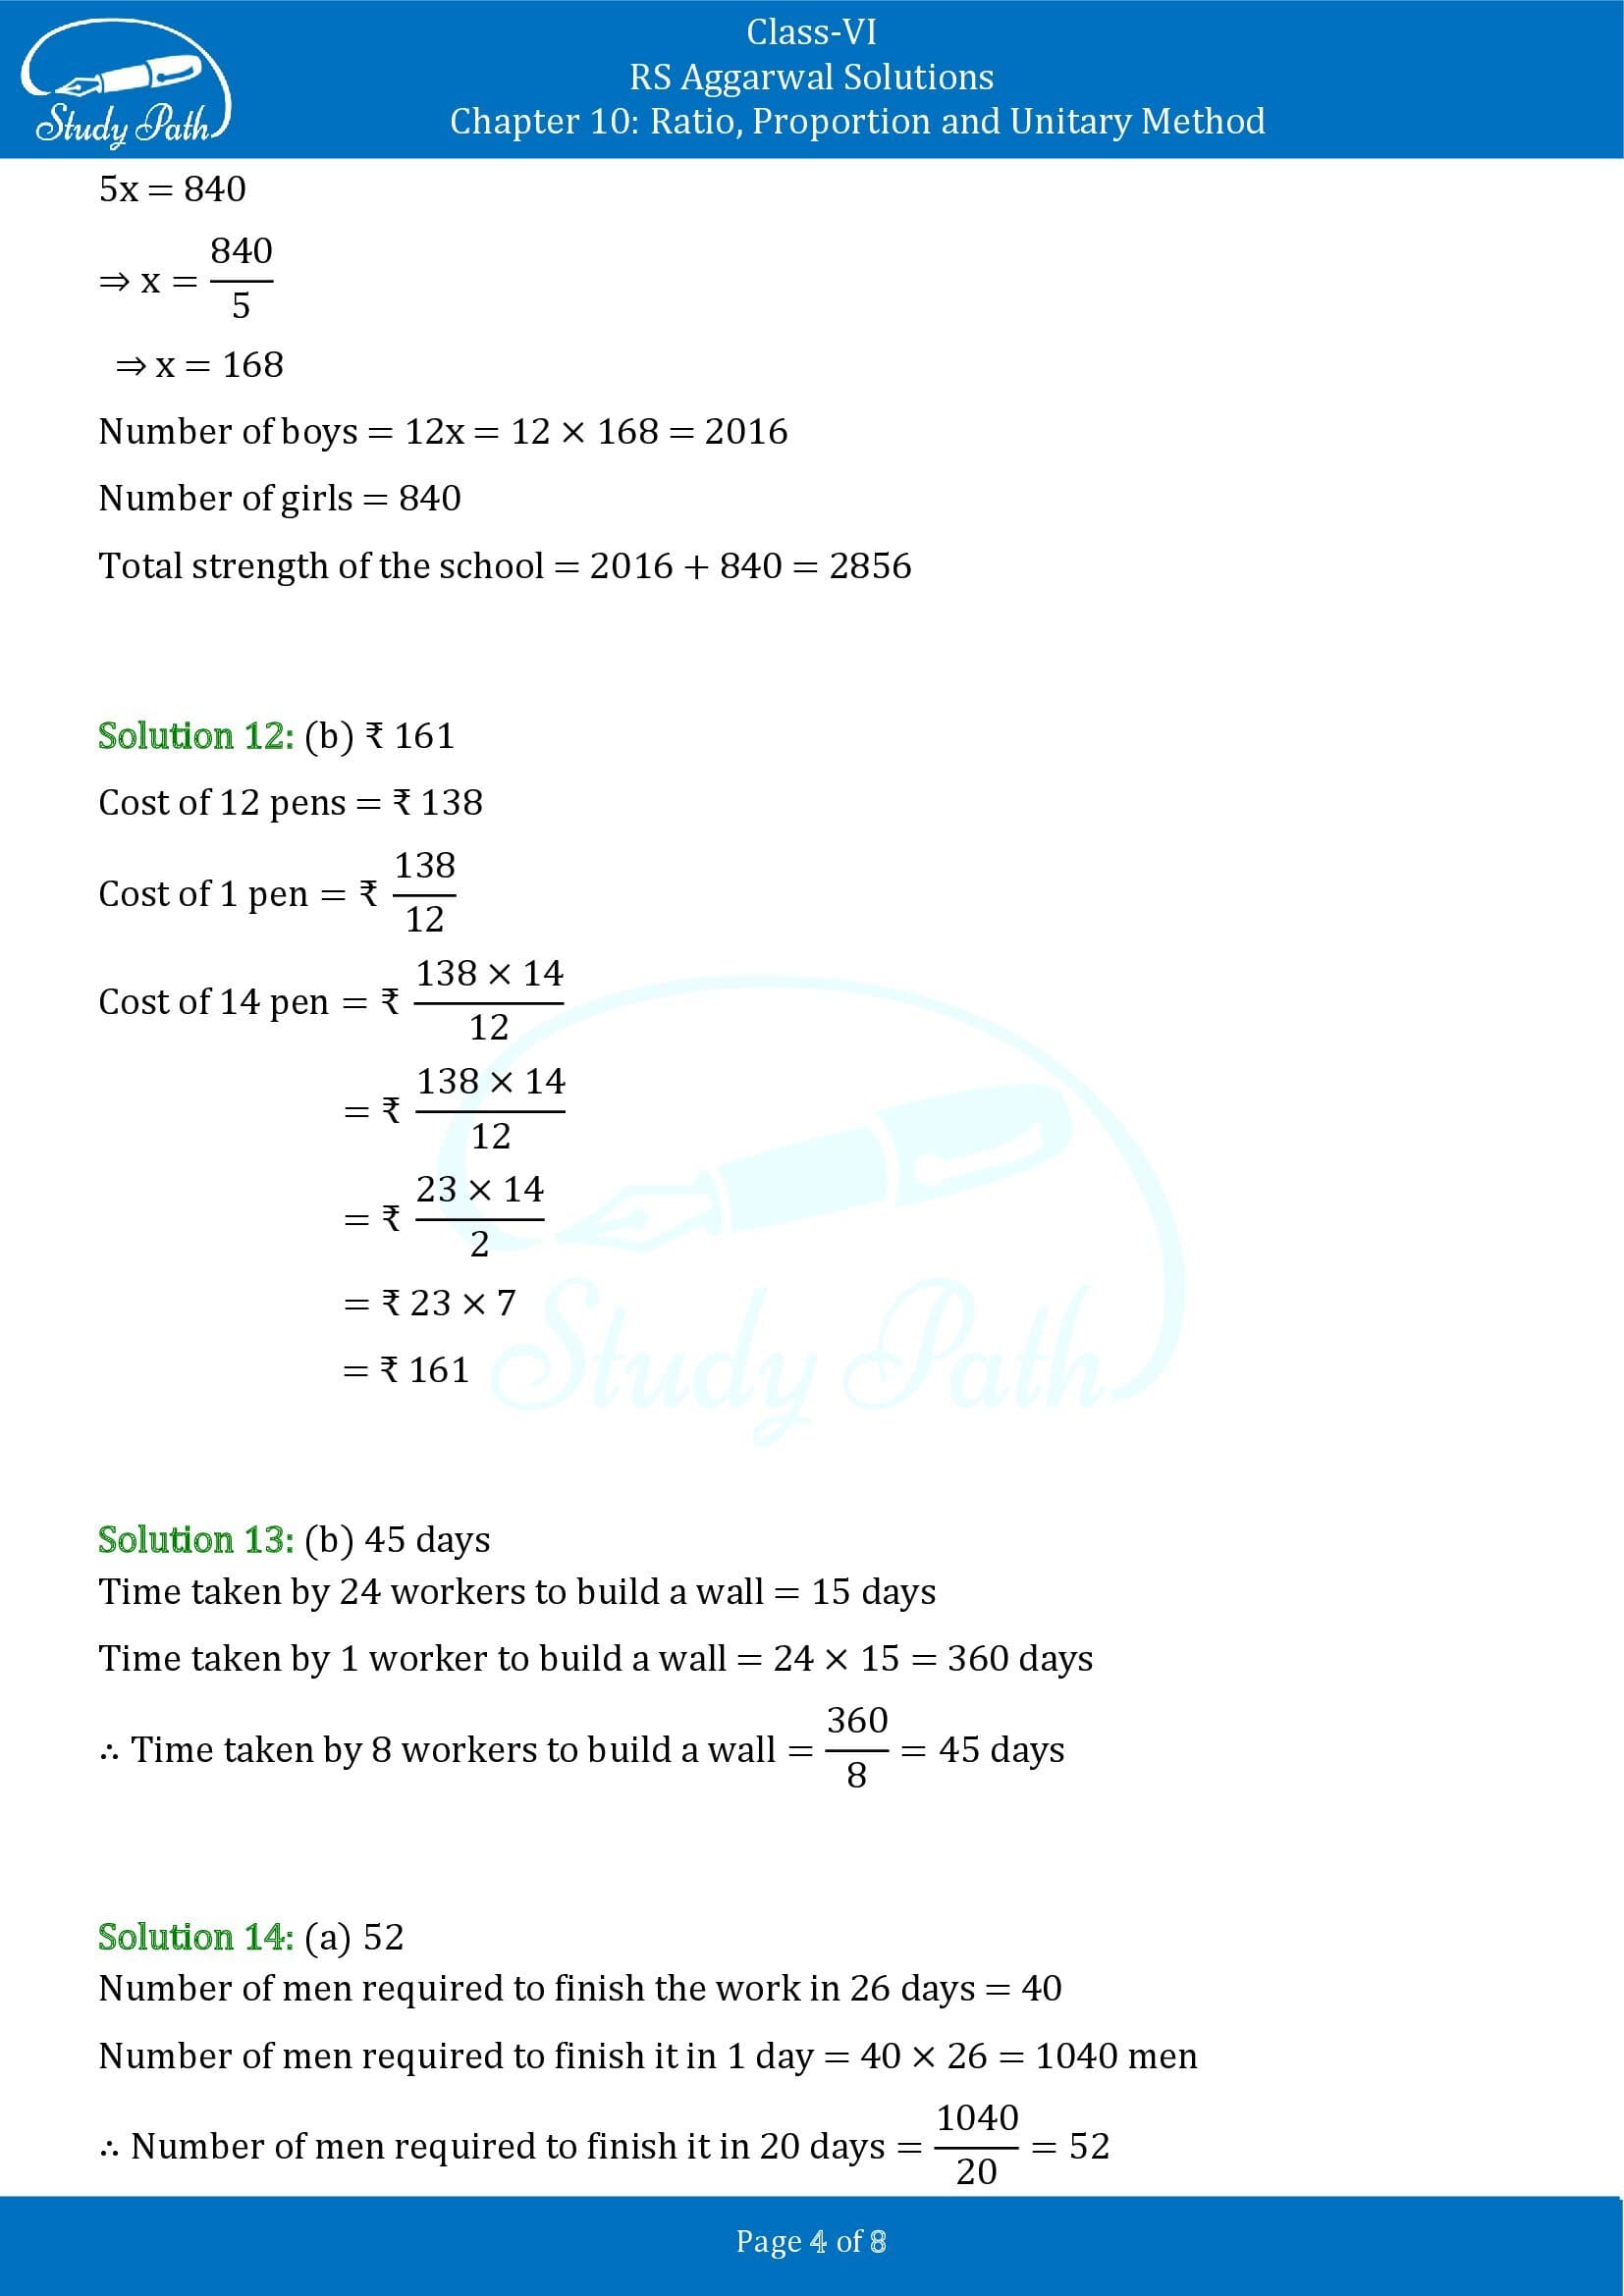 RS Aggarwal Solutions Class 6 Chapter 10 Ratio Proportion and Unitary Method Exercise 10D MCQs 00004